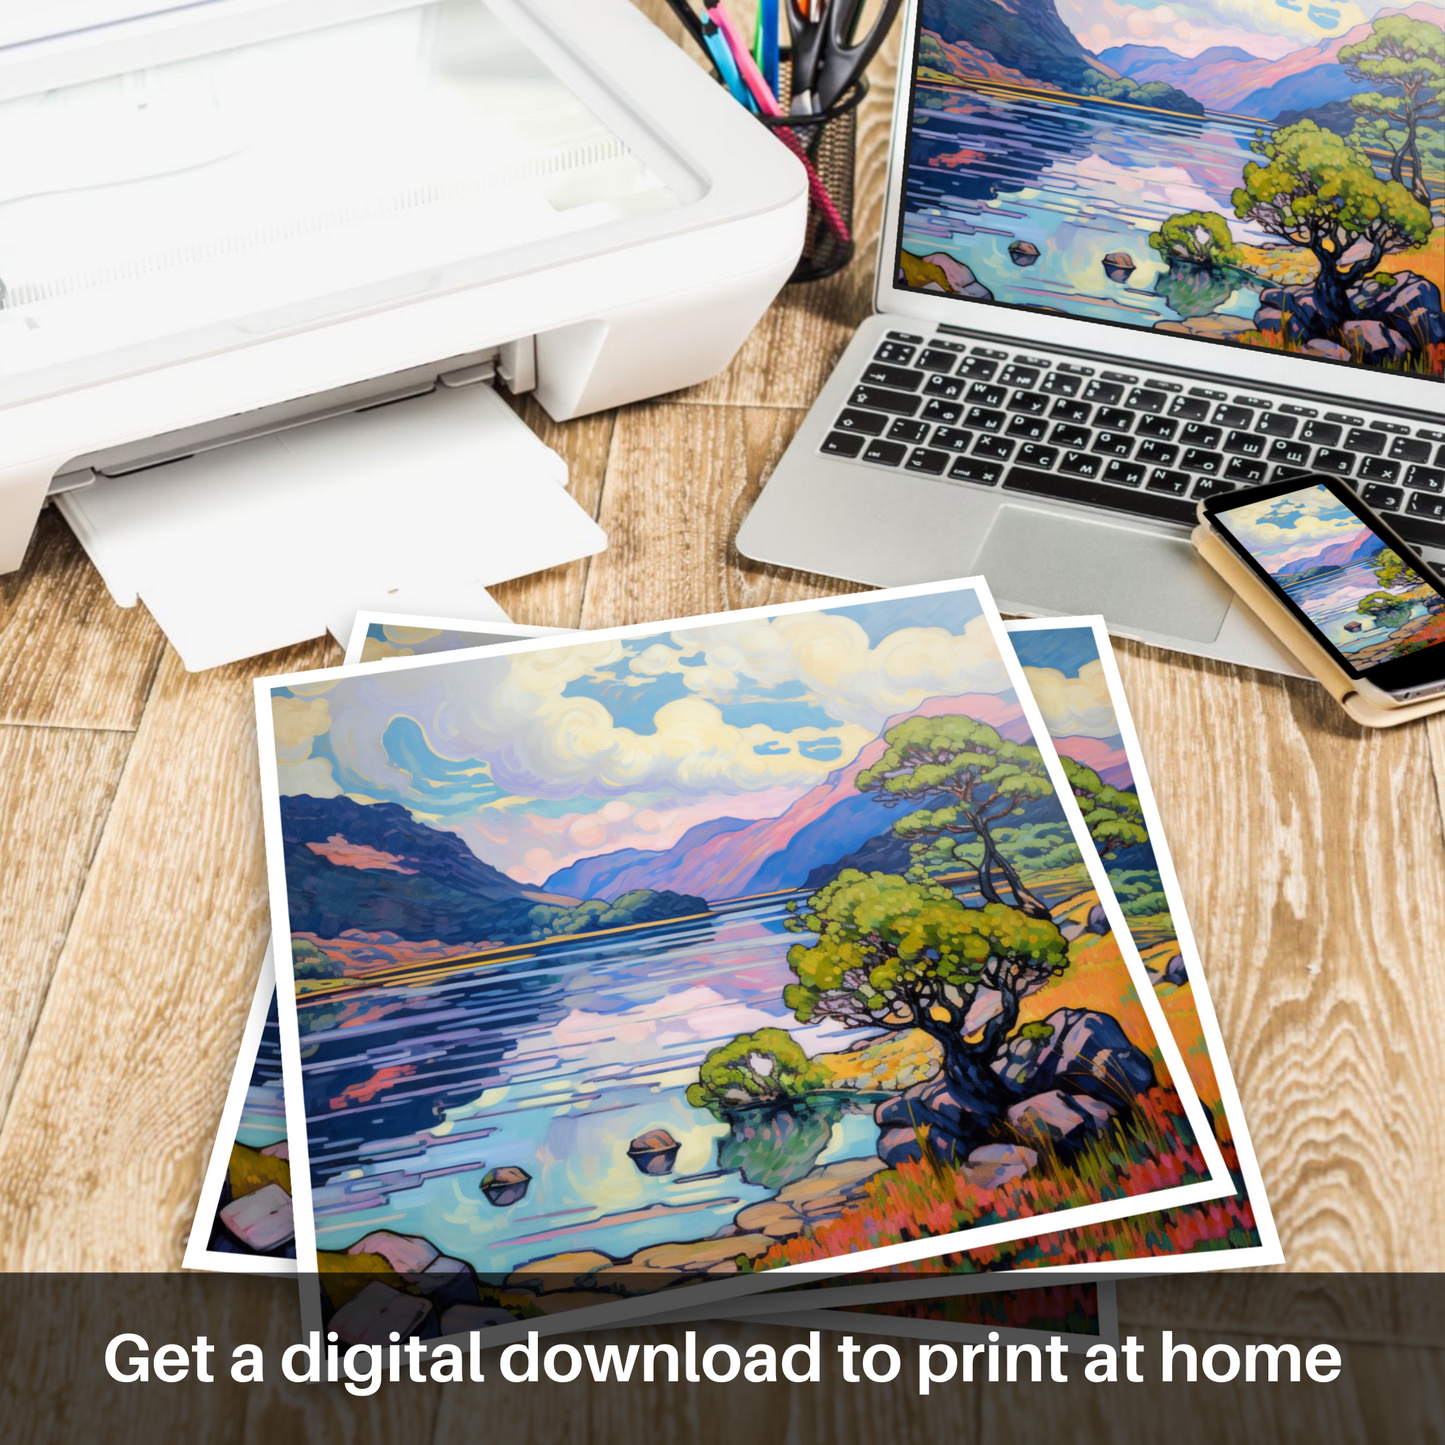 Downloadable and printable picture of Loch Morar, Highlands in summer